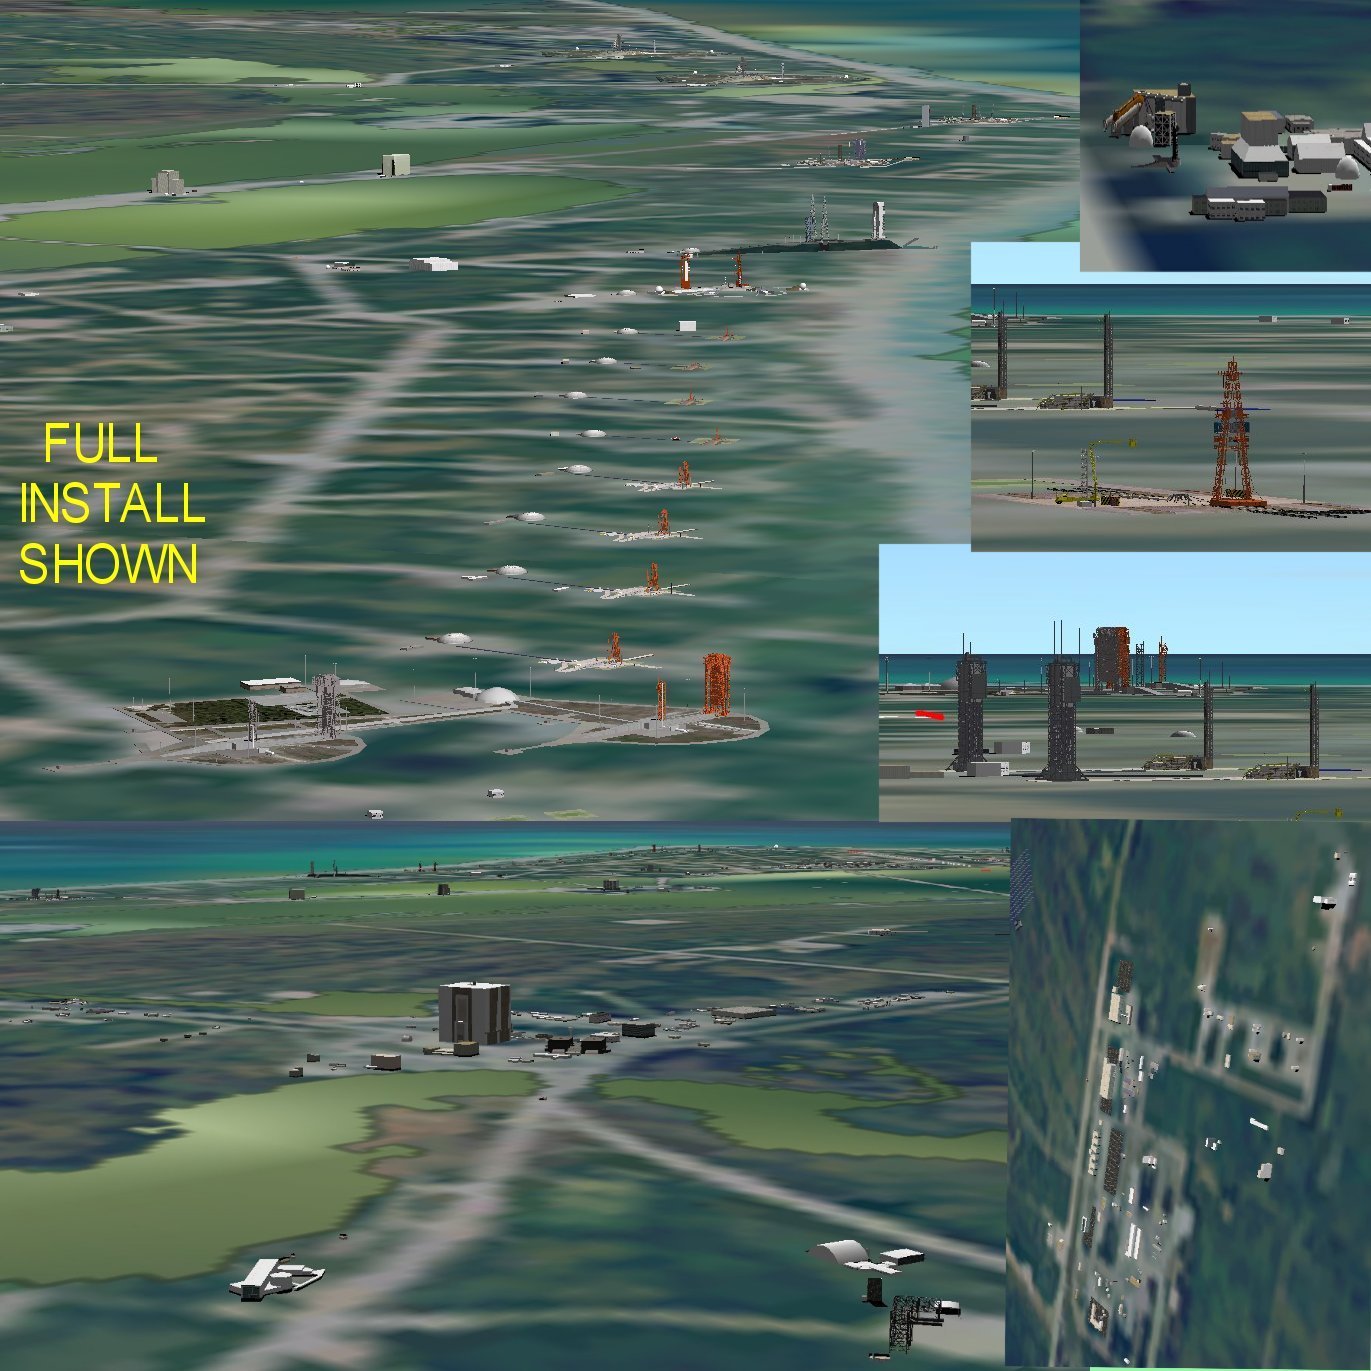 Earth KSC Missile Row Ver2 Montage01b.jpg